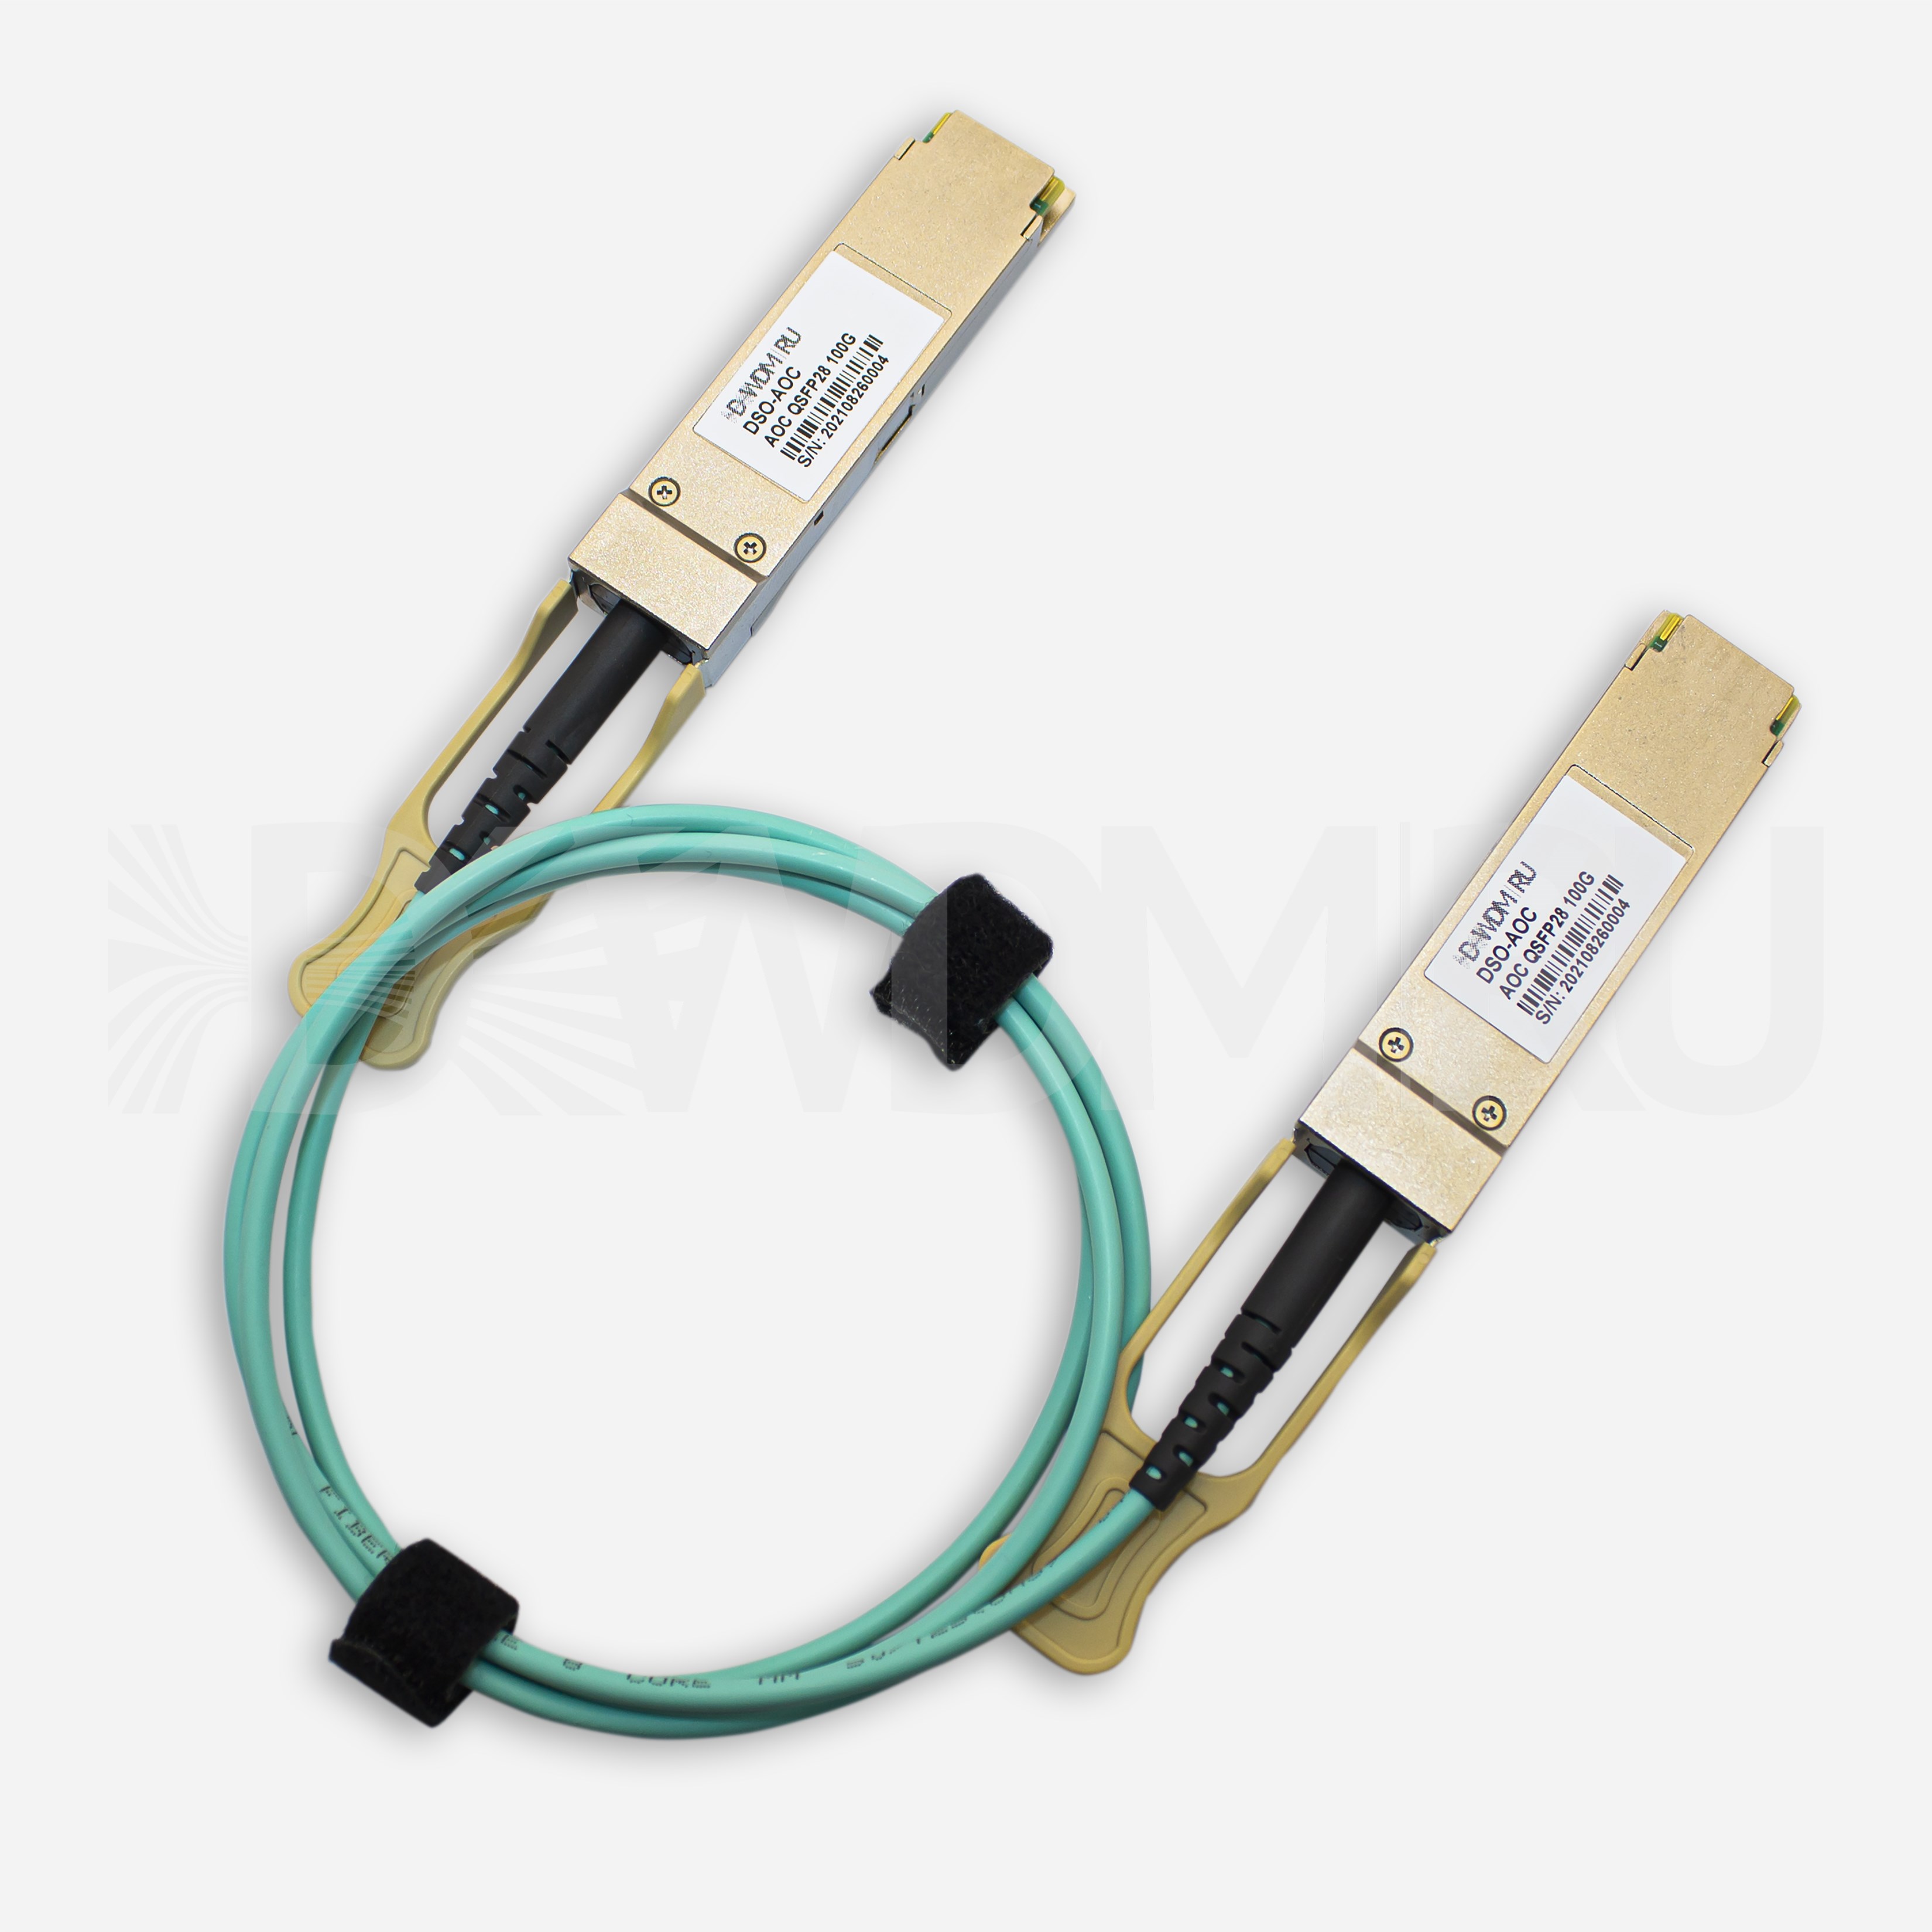 Active Optical Cable, QSFP28, 100 Гб/с, 1 м- ДВДМ.РУ (DSO-AOC-100-5)